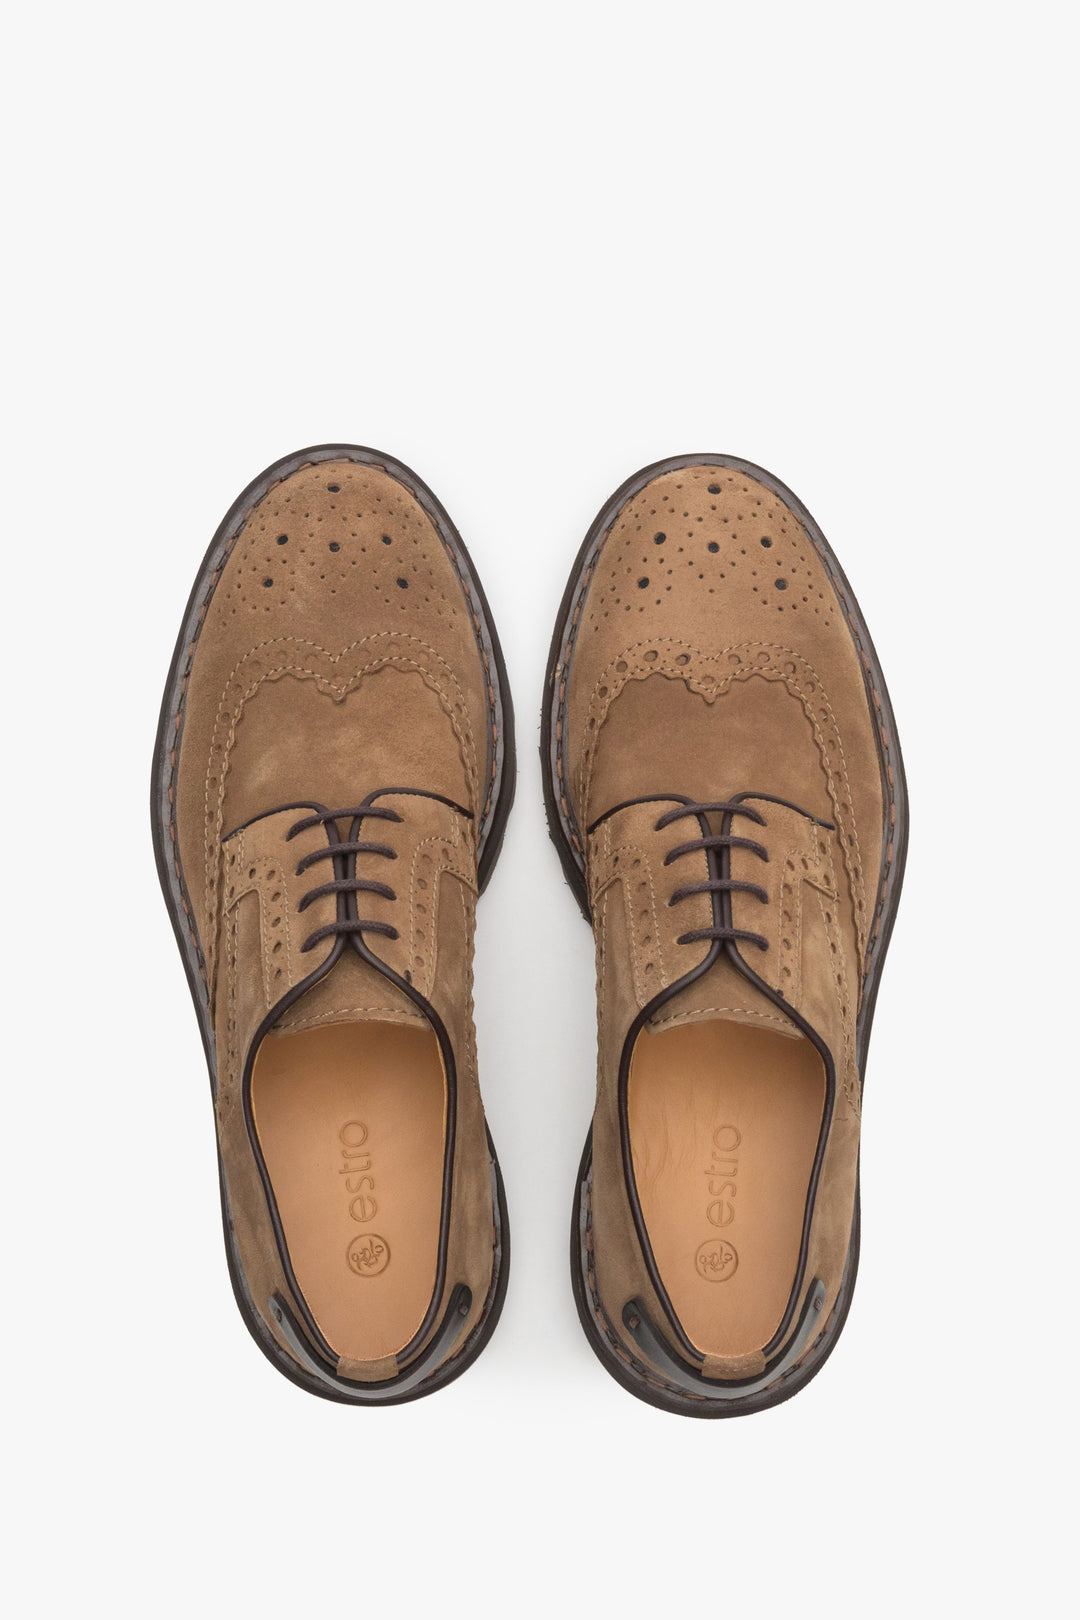 Light brown men's Oxford shoes in natural suede by Estro - top view presentation of the model.